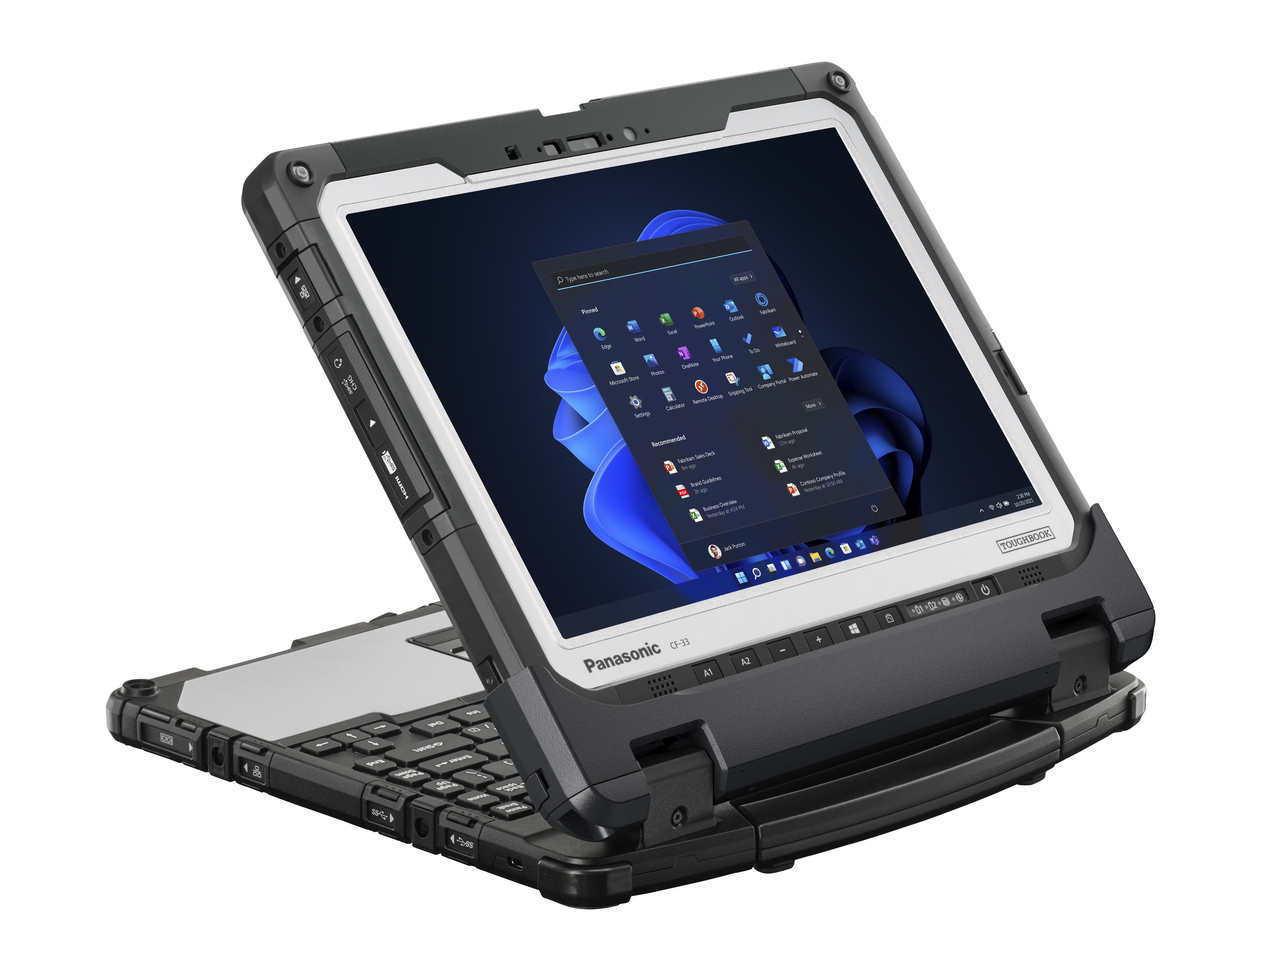 Panasonic TOUGHBOOK CF-33 open and flipped